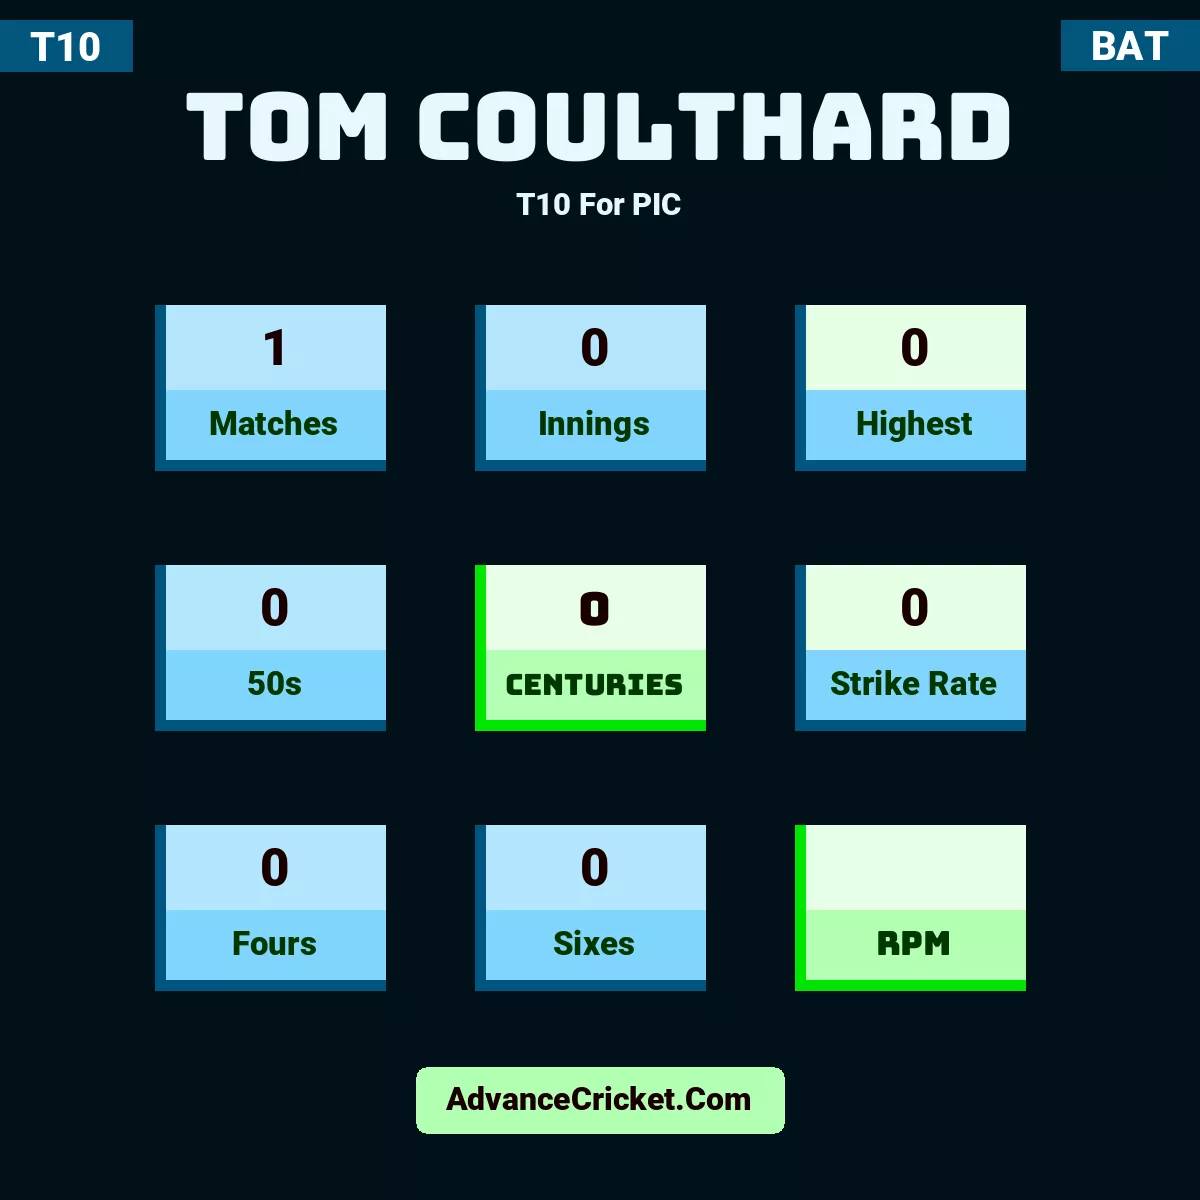 Tom Coulthard T10  For PIC, Tom Coulthard played 1 matches, scored 0 runs as highest, 0 half-centuries, and 0 centuries, with a strike rate of 0. T.Coulthard hit 0 fours and 0 sixes.